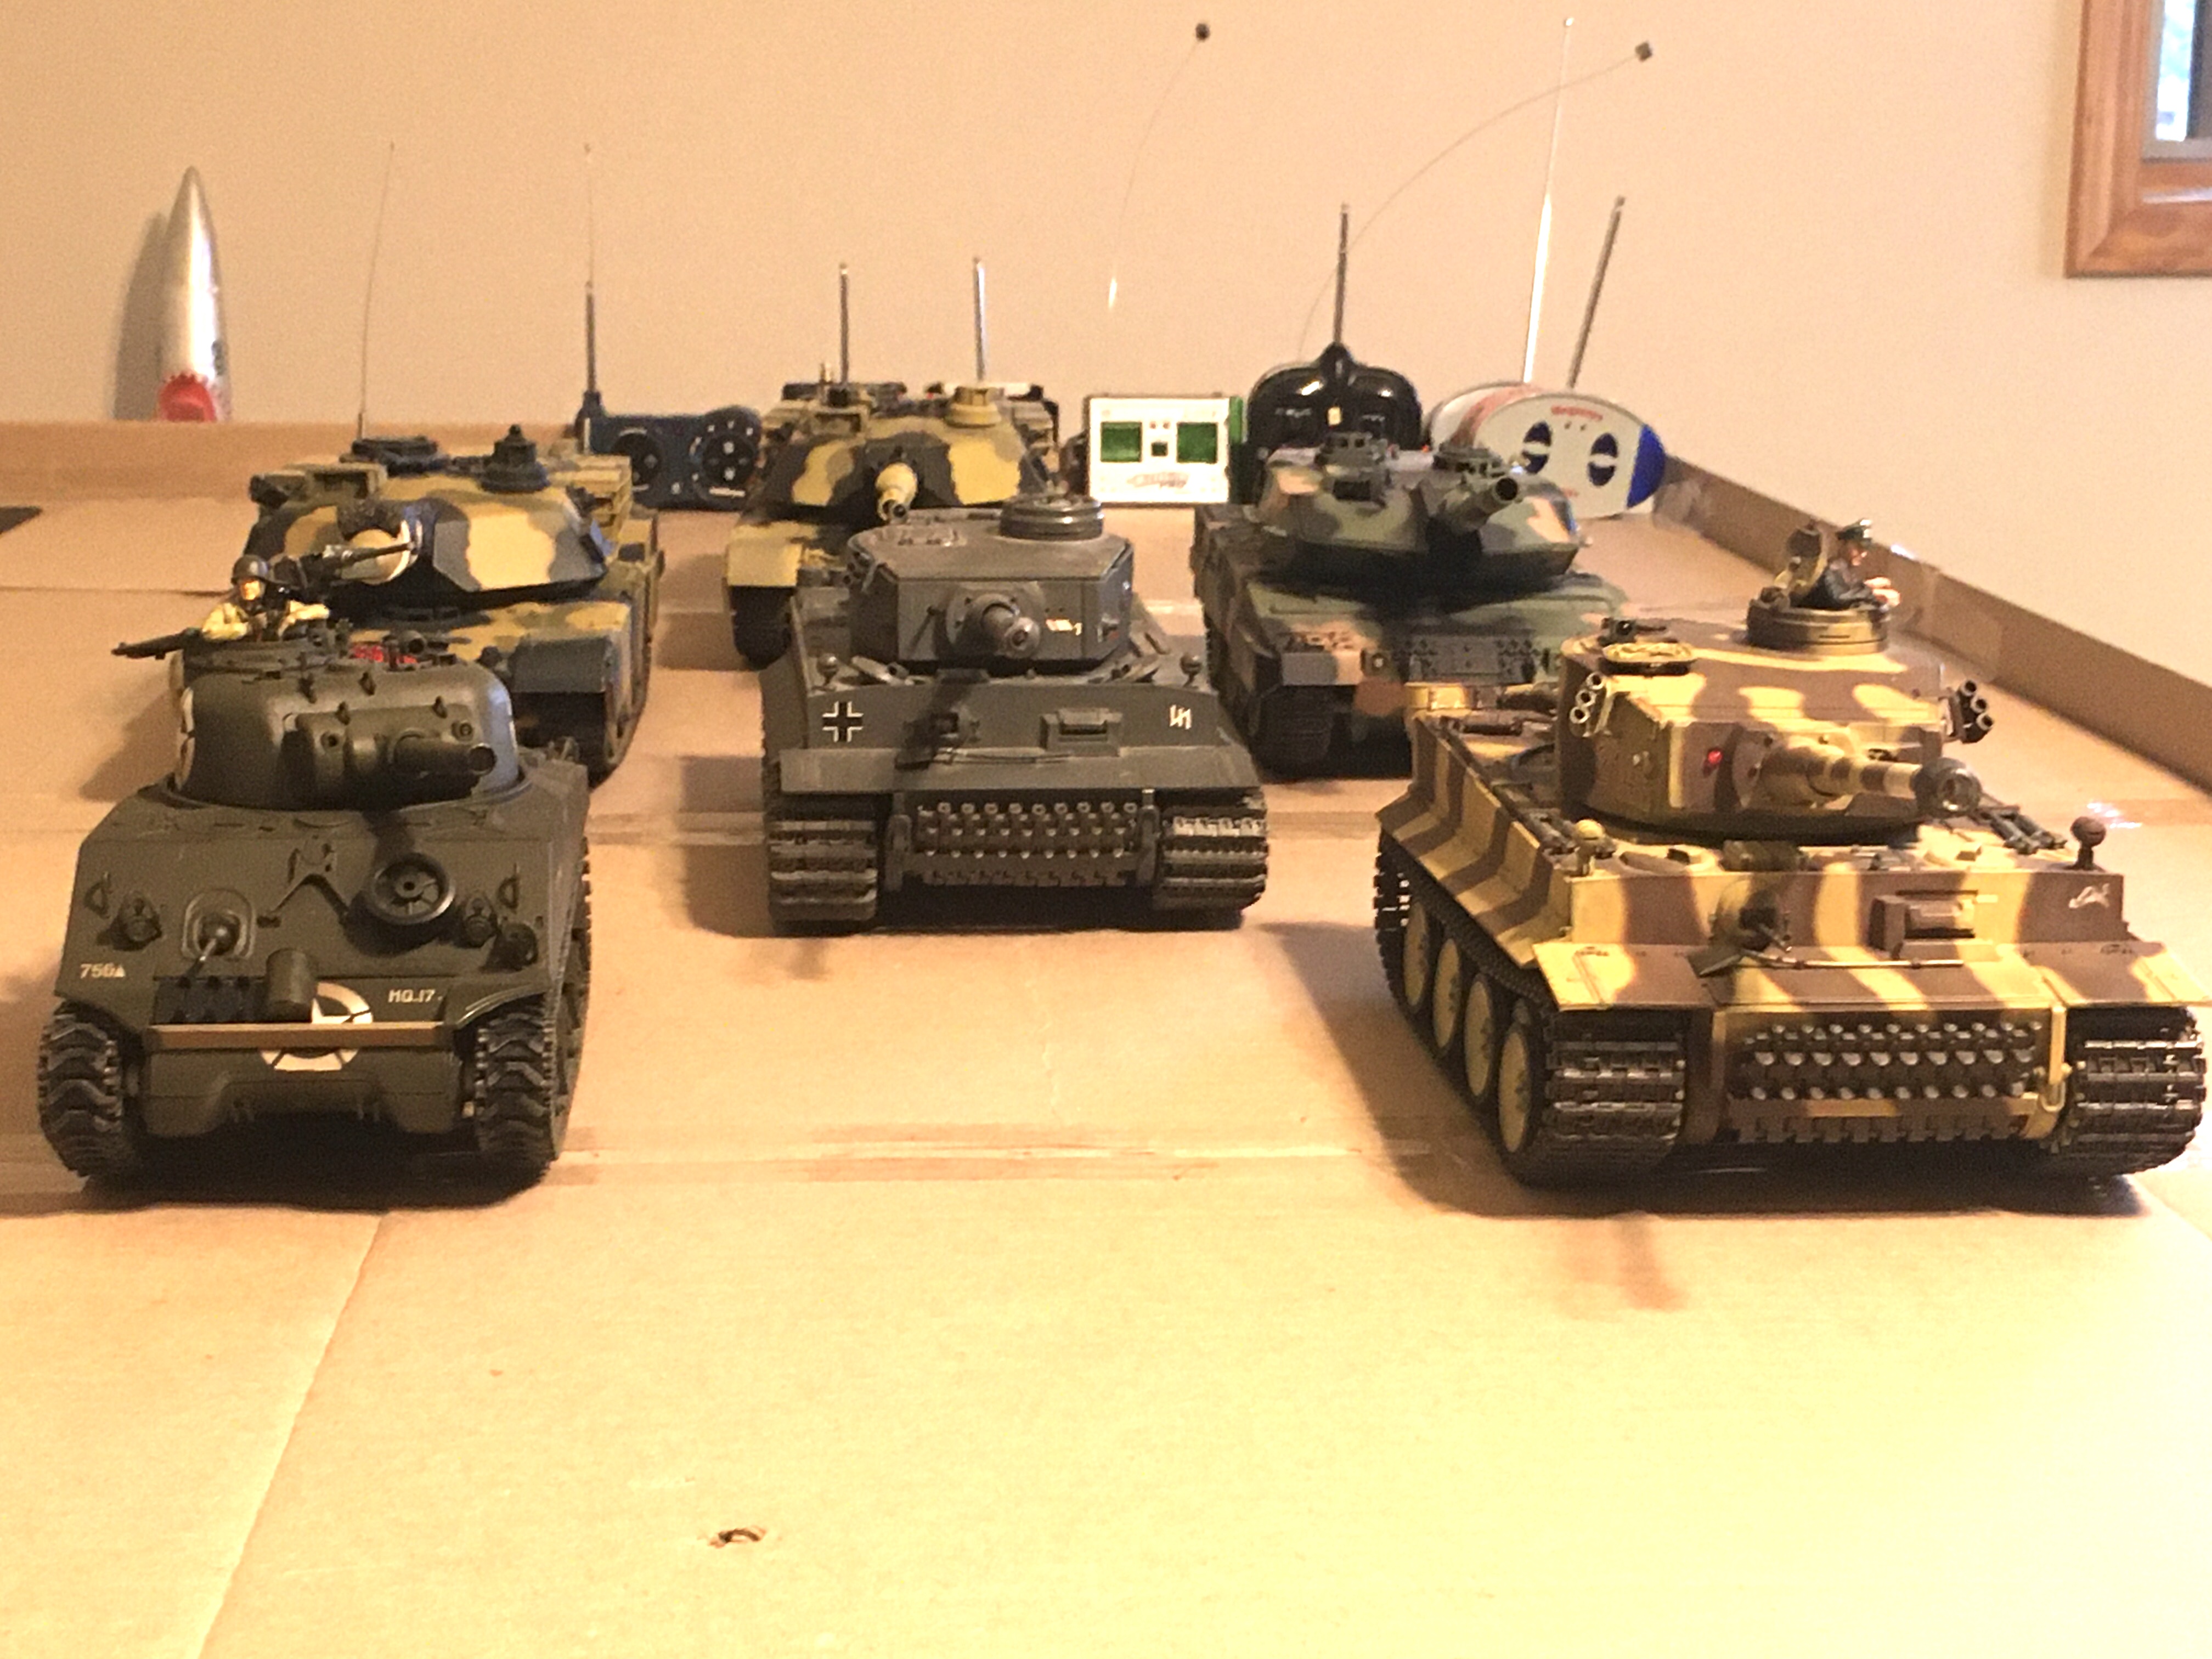 All of these are 1/24 HL compatible Battle Tanks